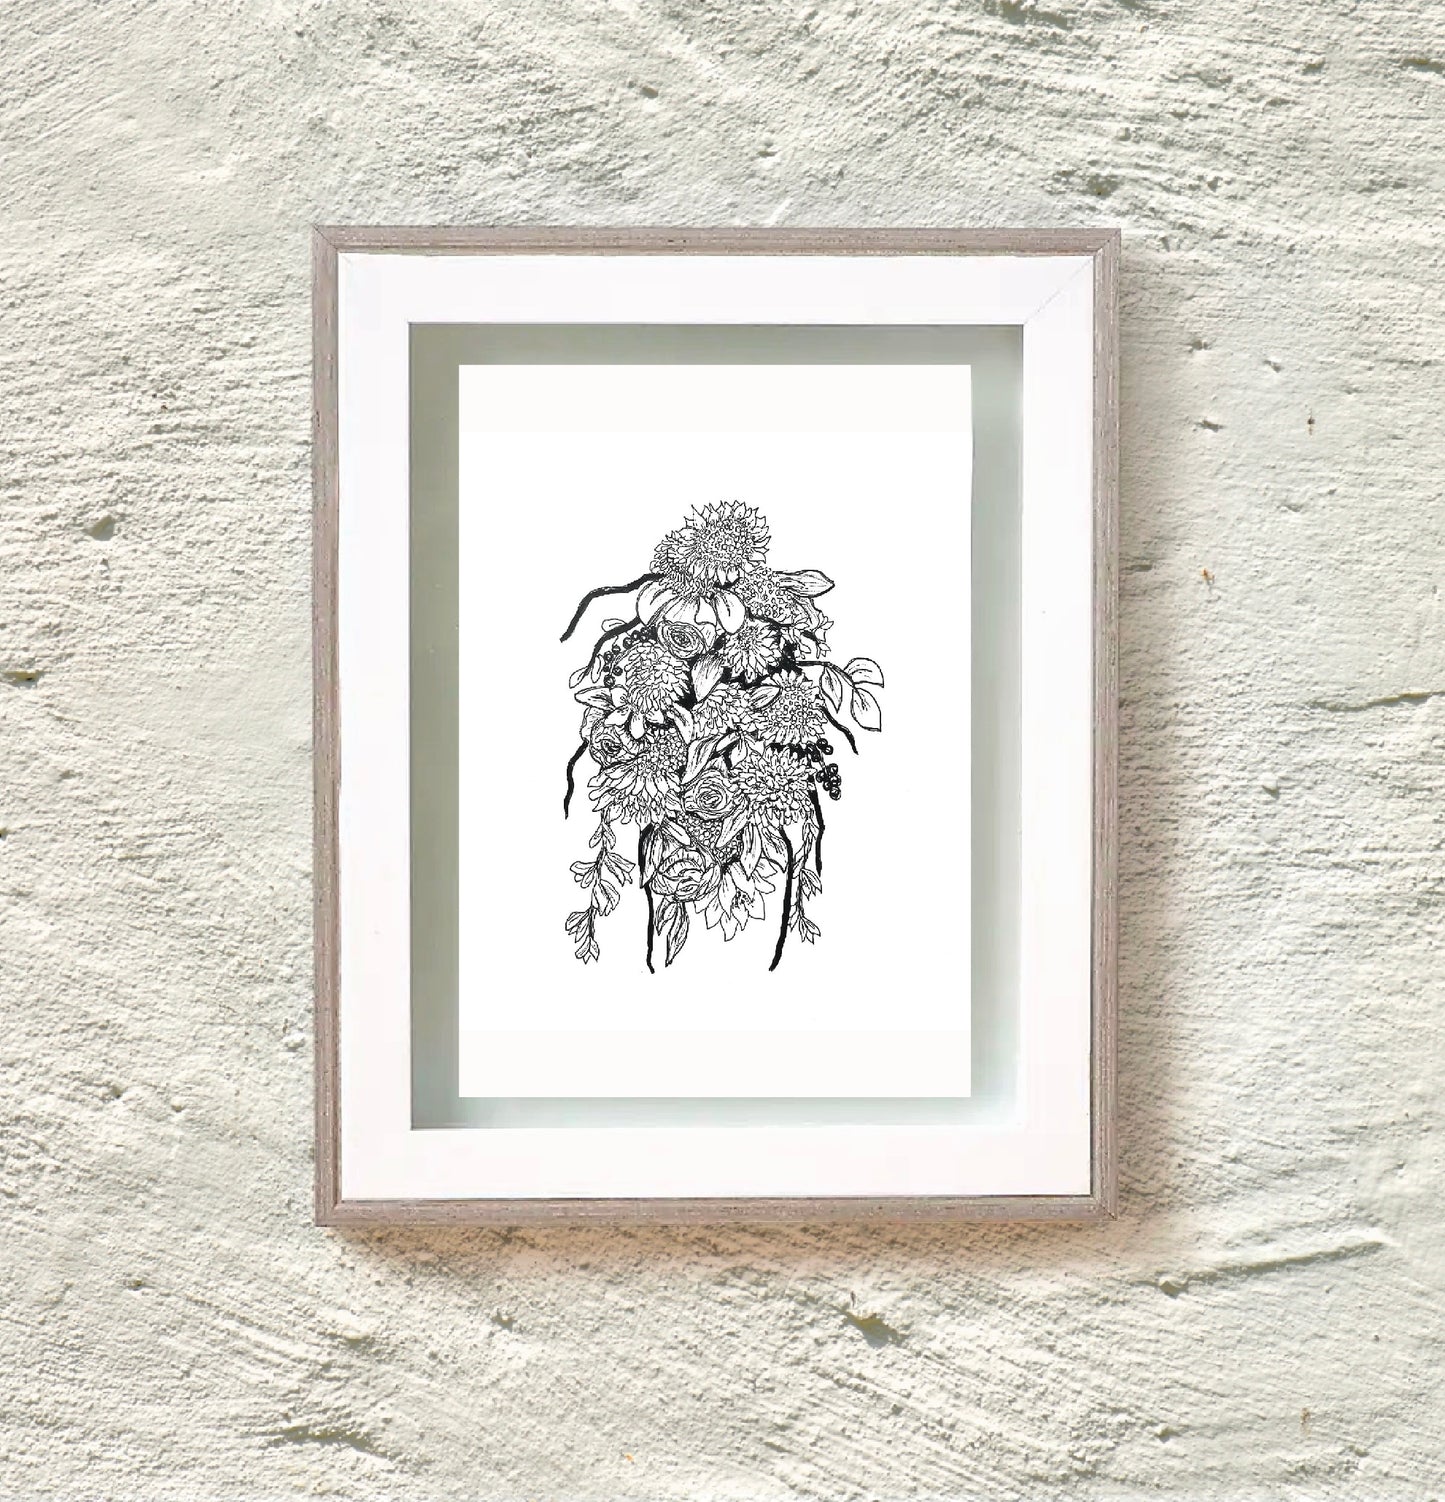 Wildflower bouquet ink drawing print in white frame on white wall